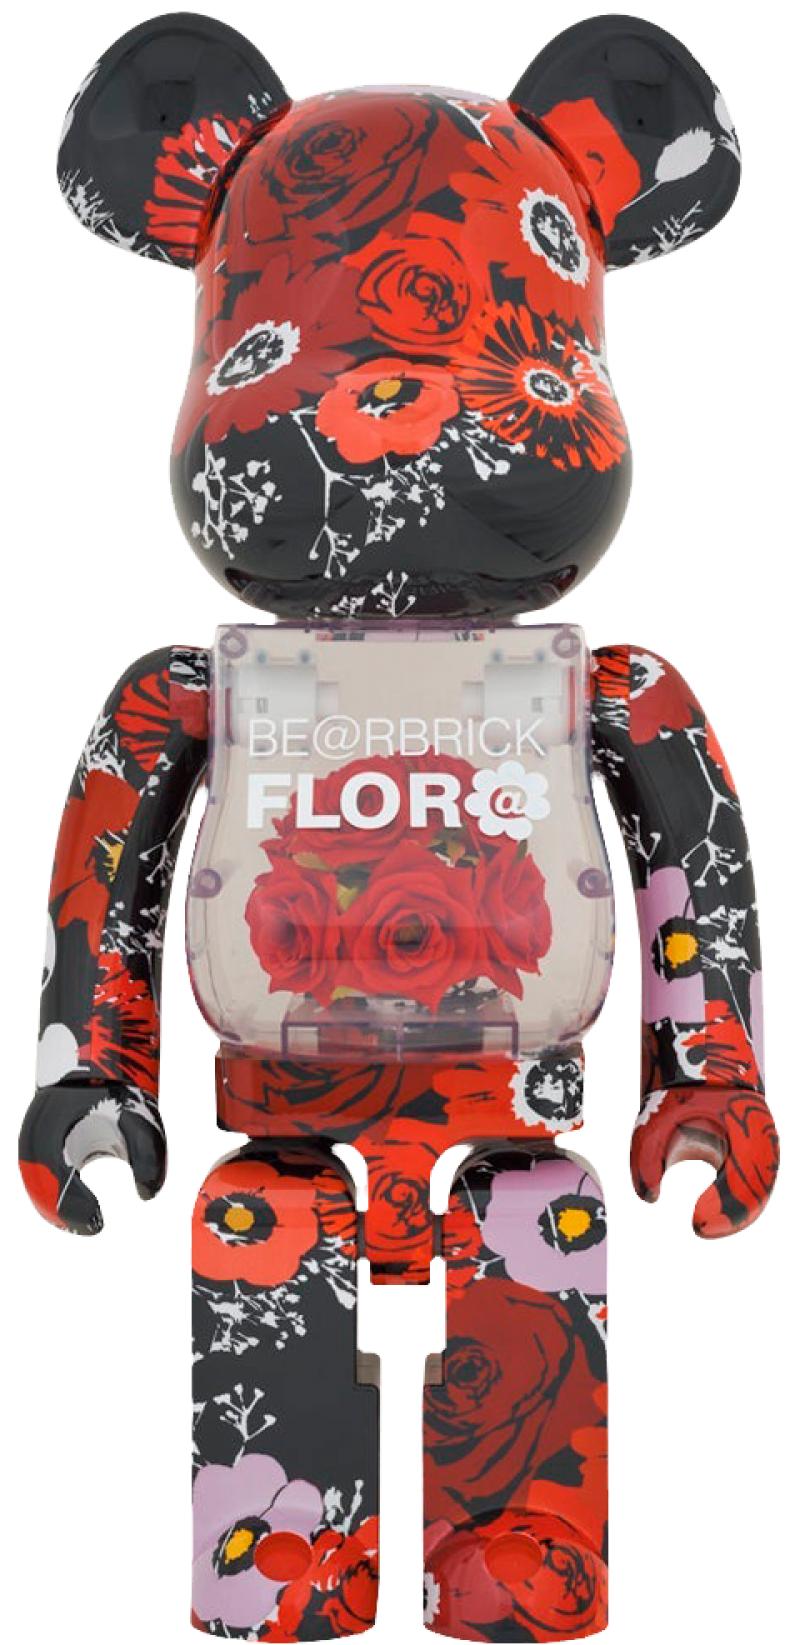 Be@rbrick Flor@ 1000％ by Medicom | Sideshow Collectibles